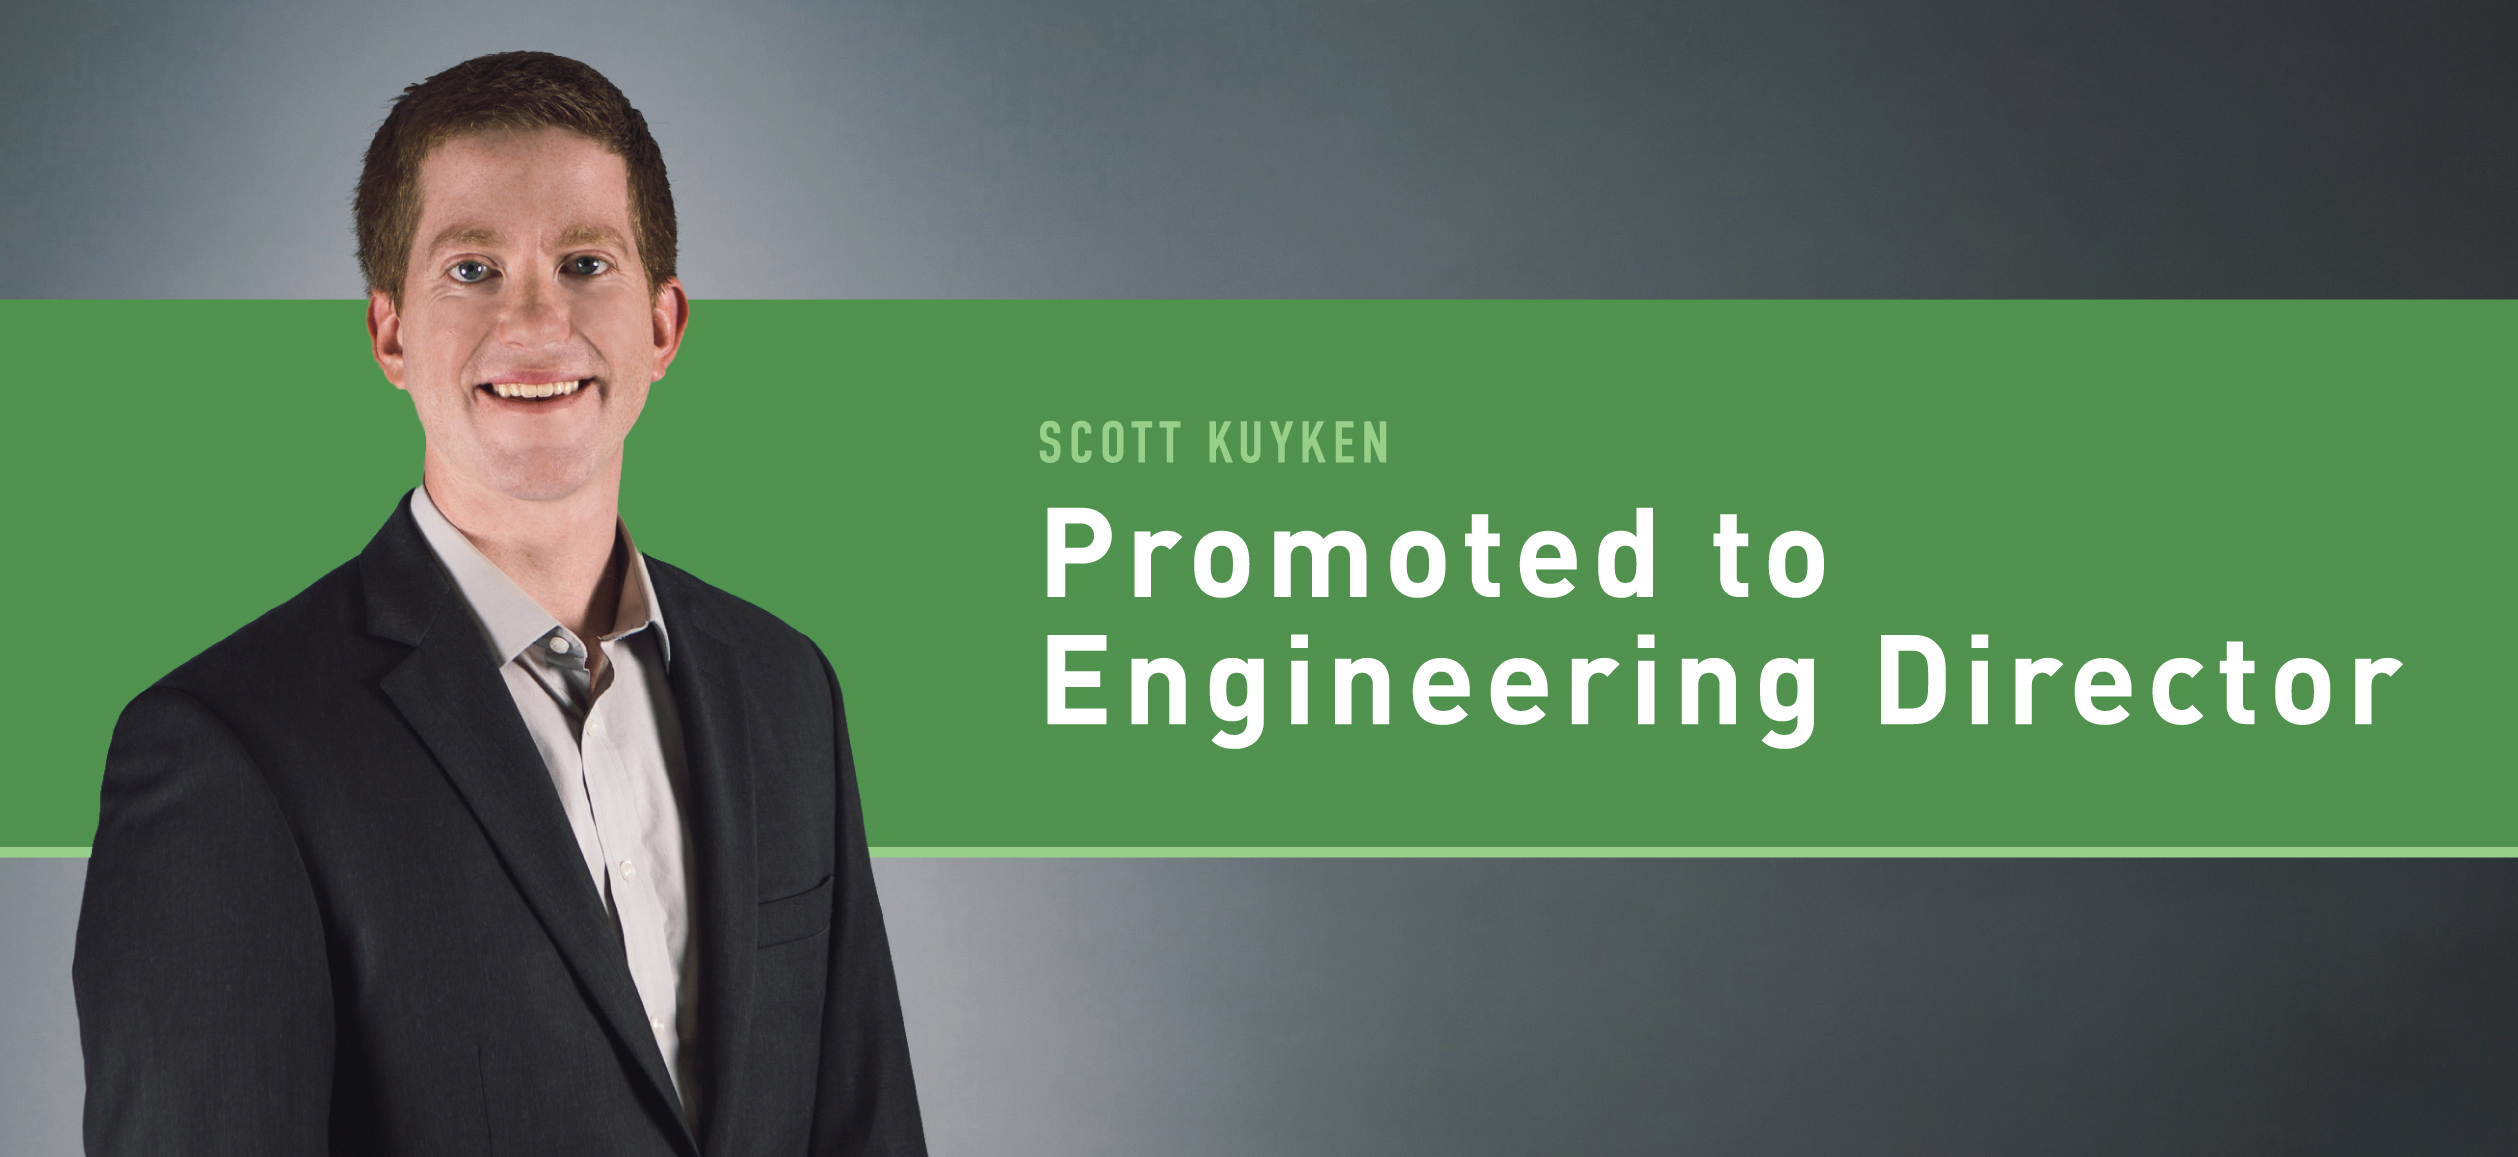 Scott Kuyken, PE, Promoted to Electrical/Distribution Engineering Director